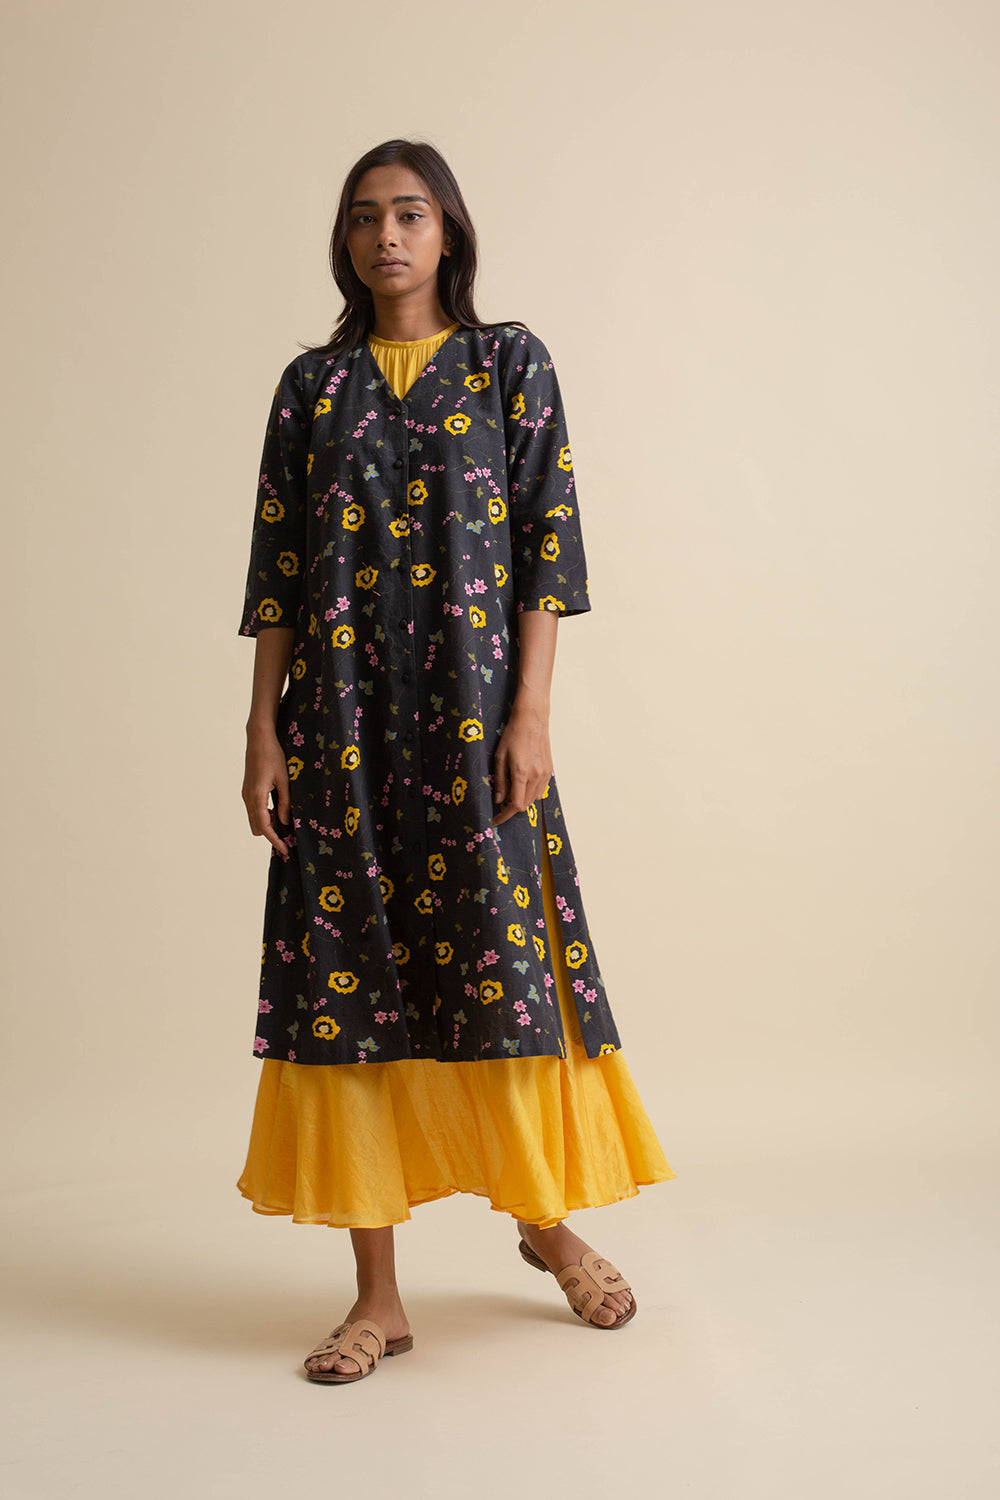 Printed Tunic With Yellow Inlay | Rescue